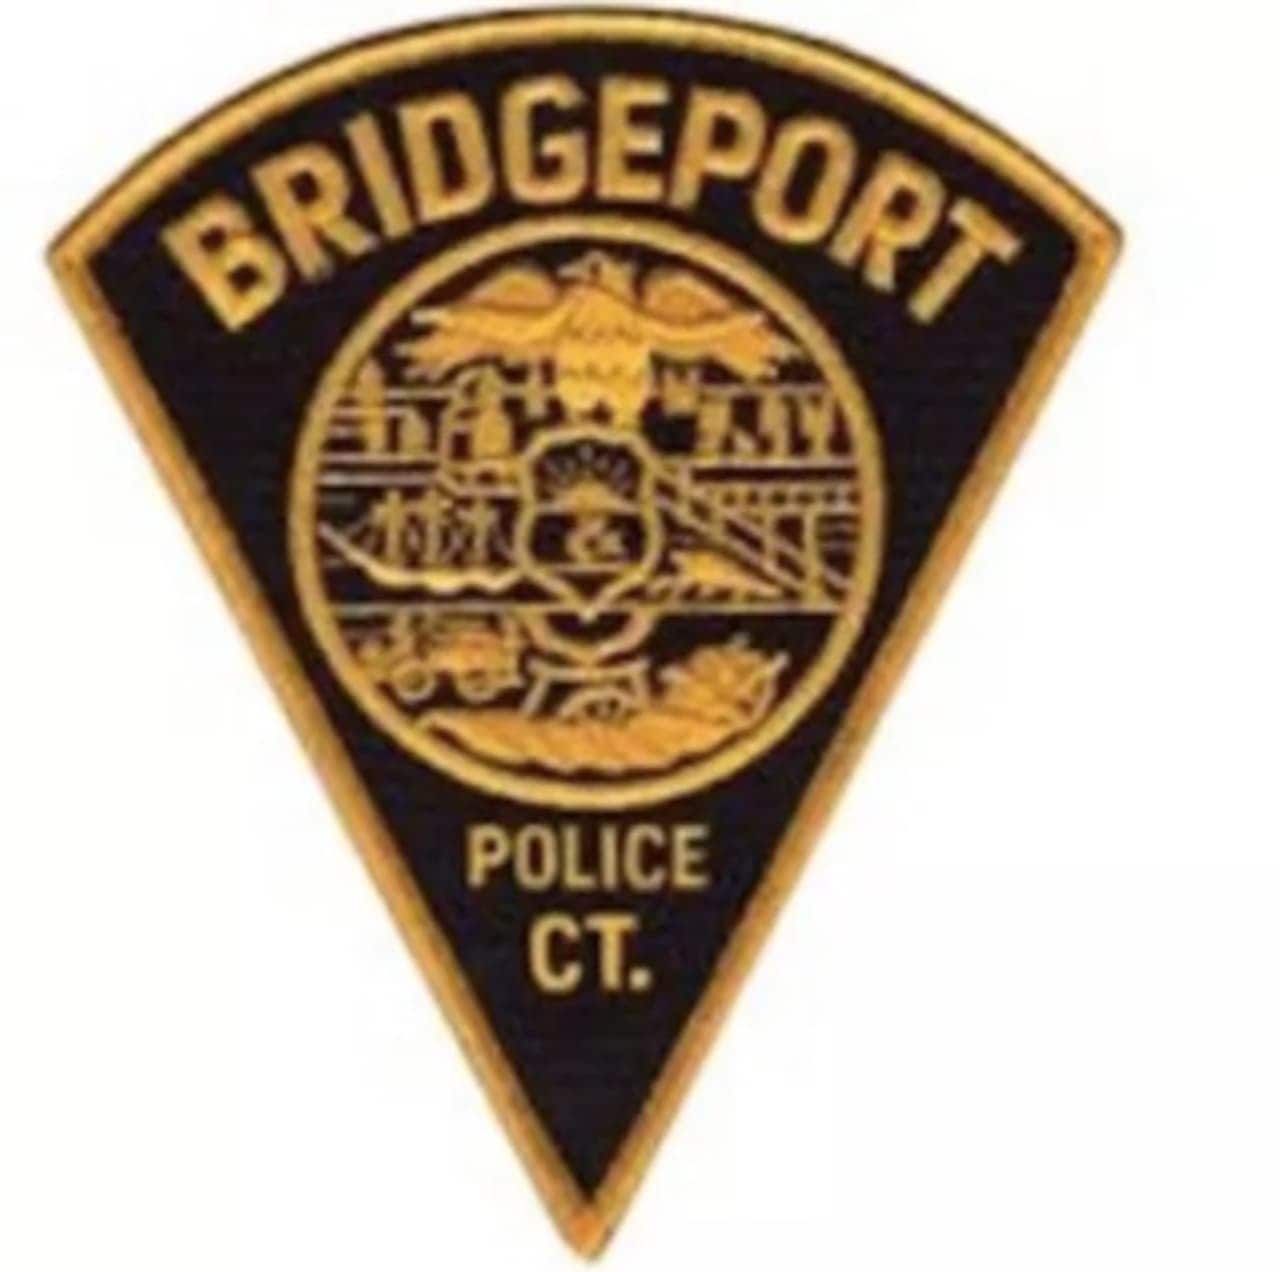 A burglar was shot breaking into a Bridgeport home on Thursday, according to the Connecticut Post.